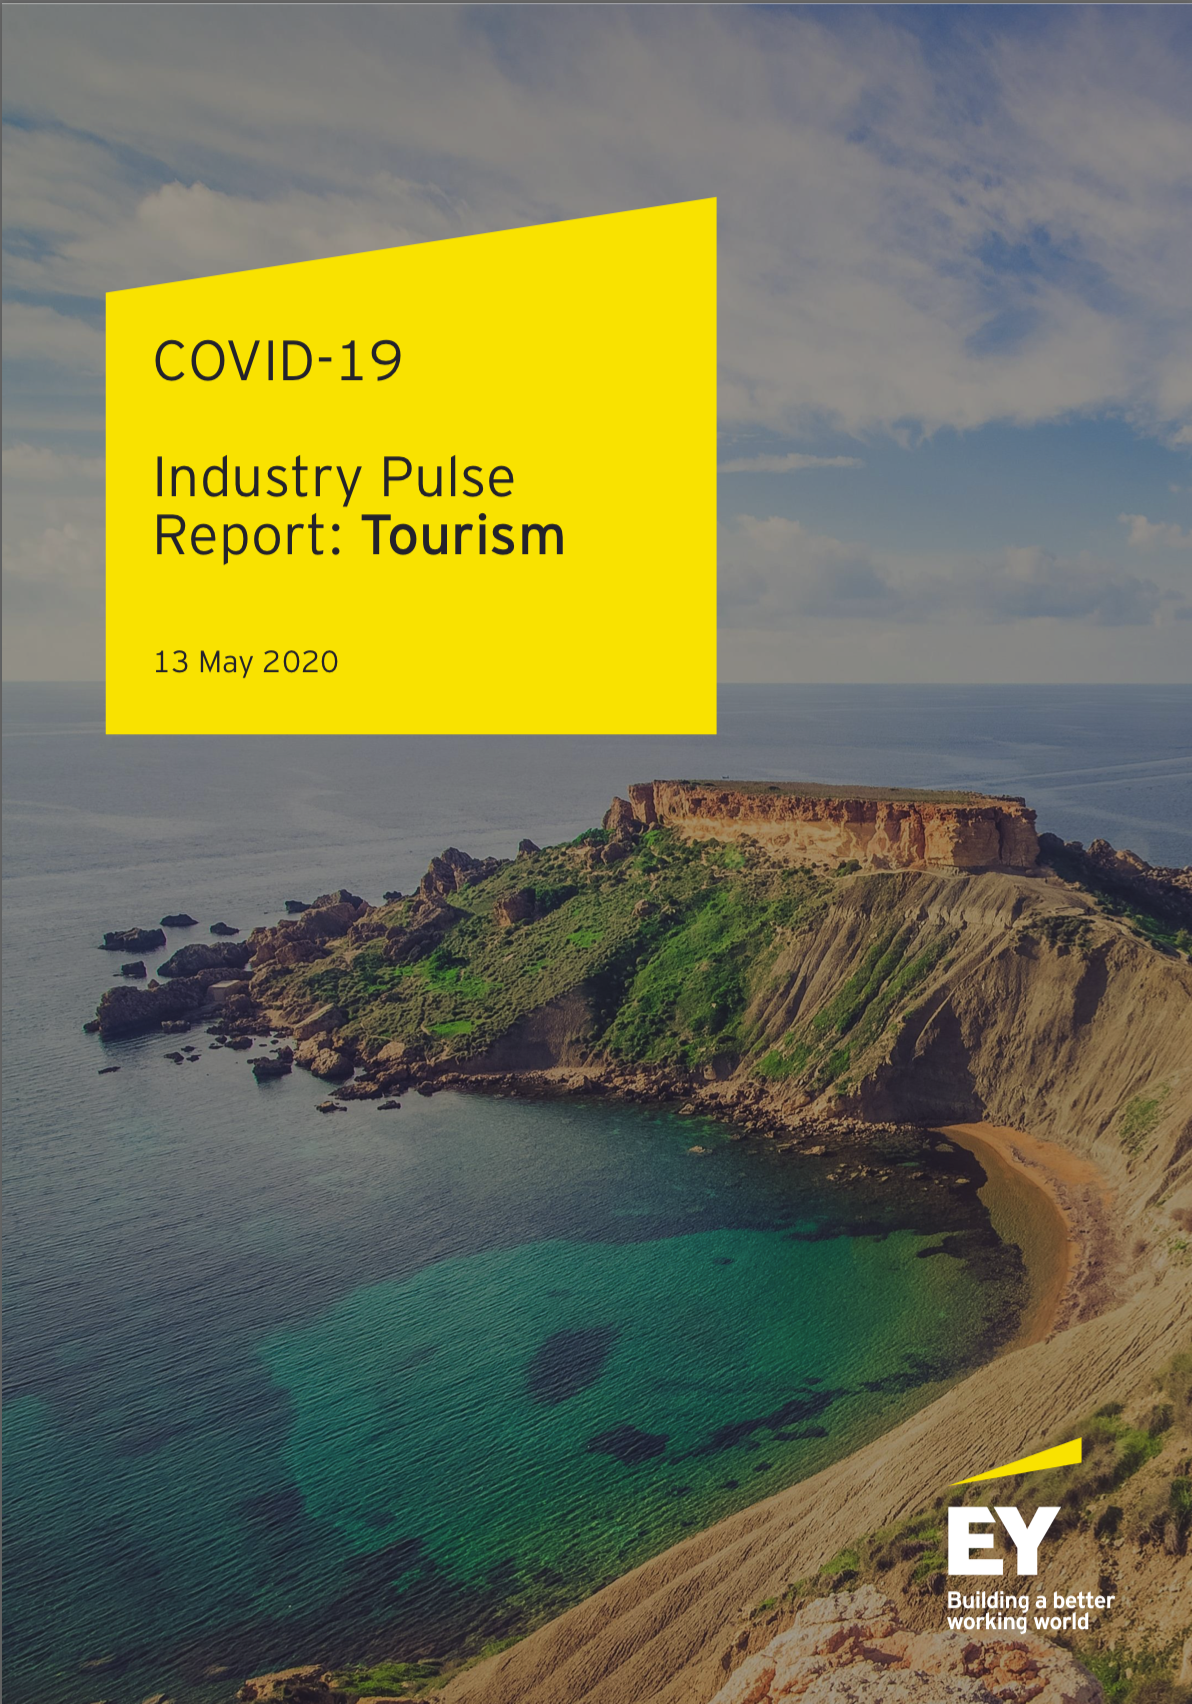 COVID-19 Industry Pulse Report: Tourism